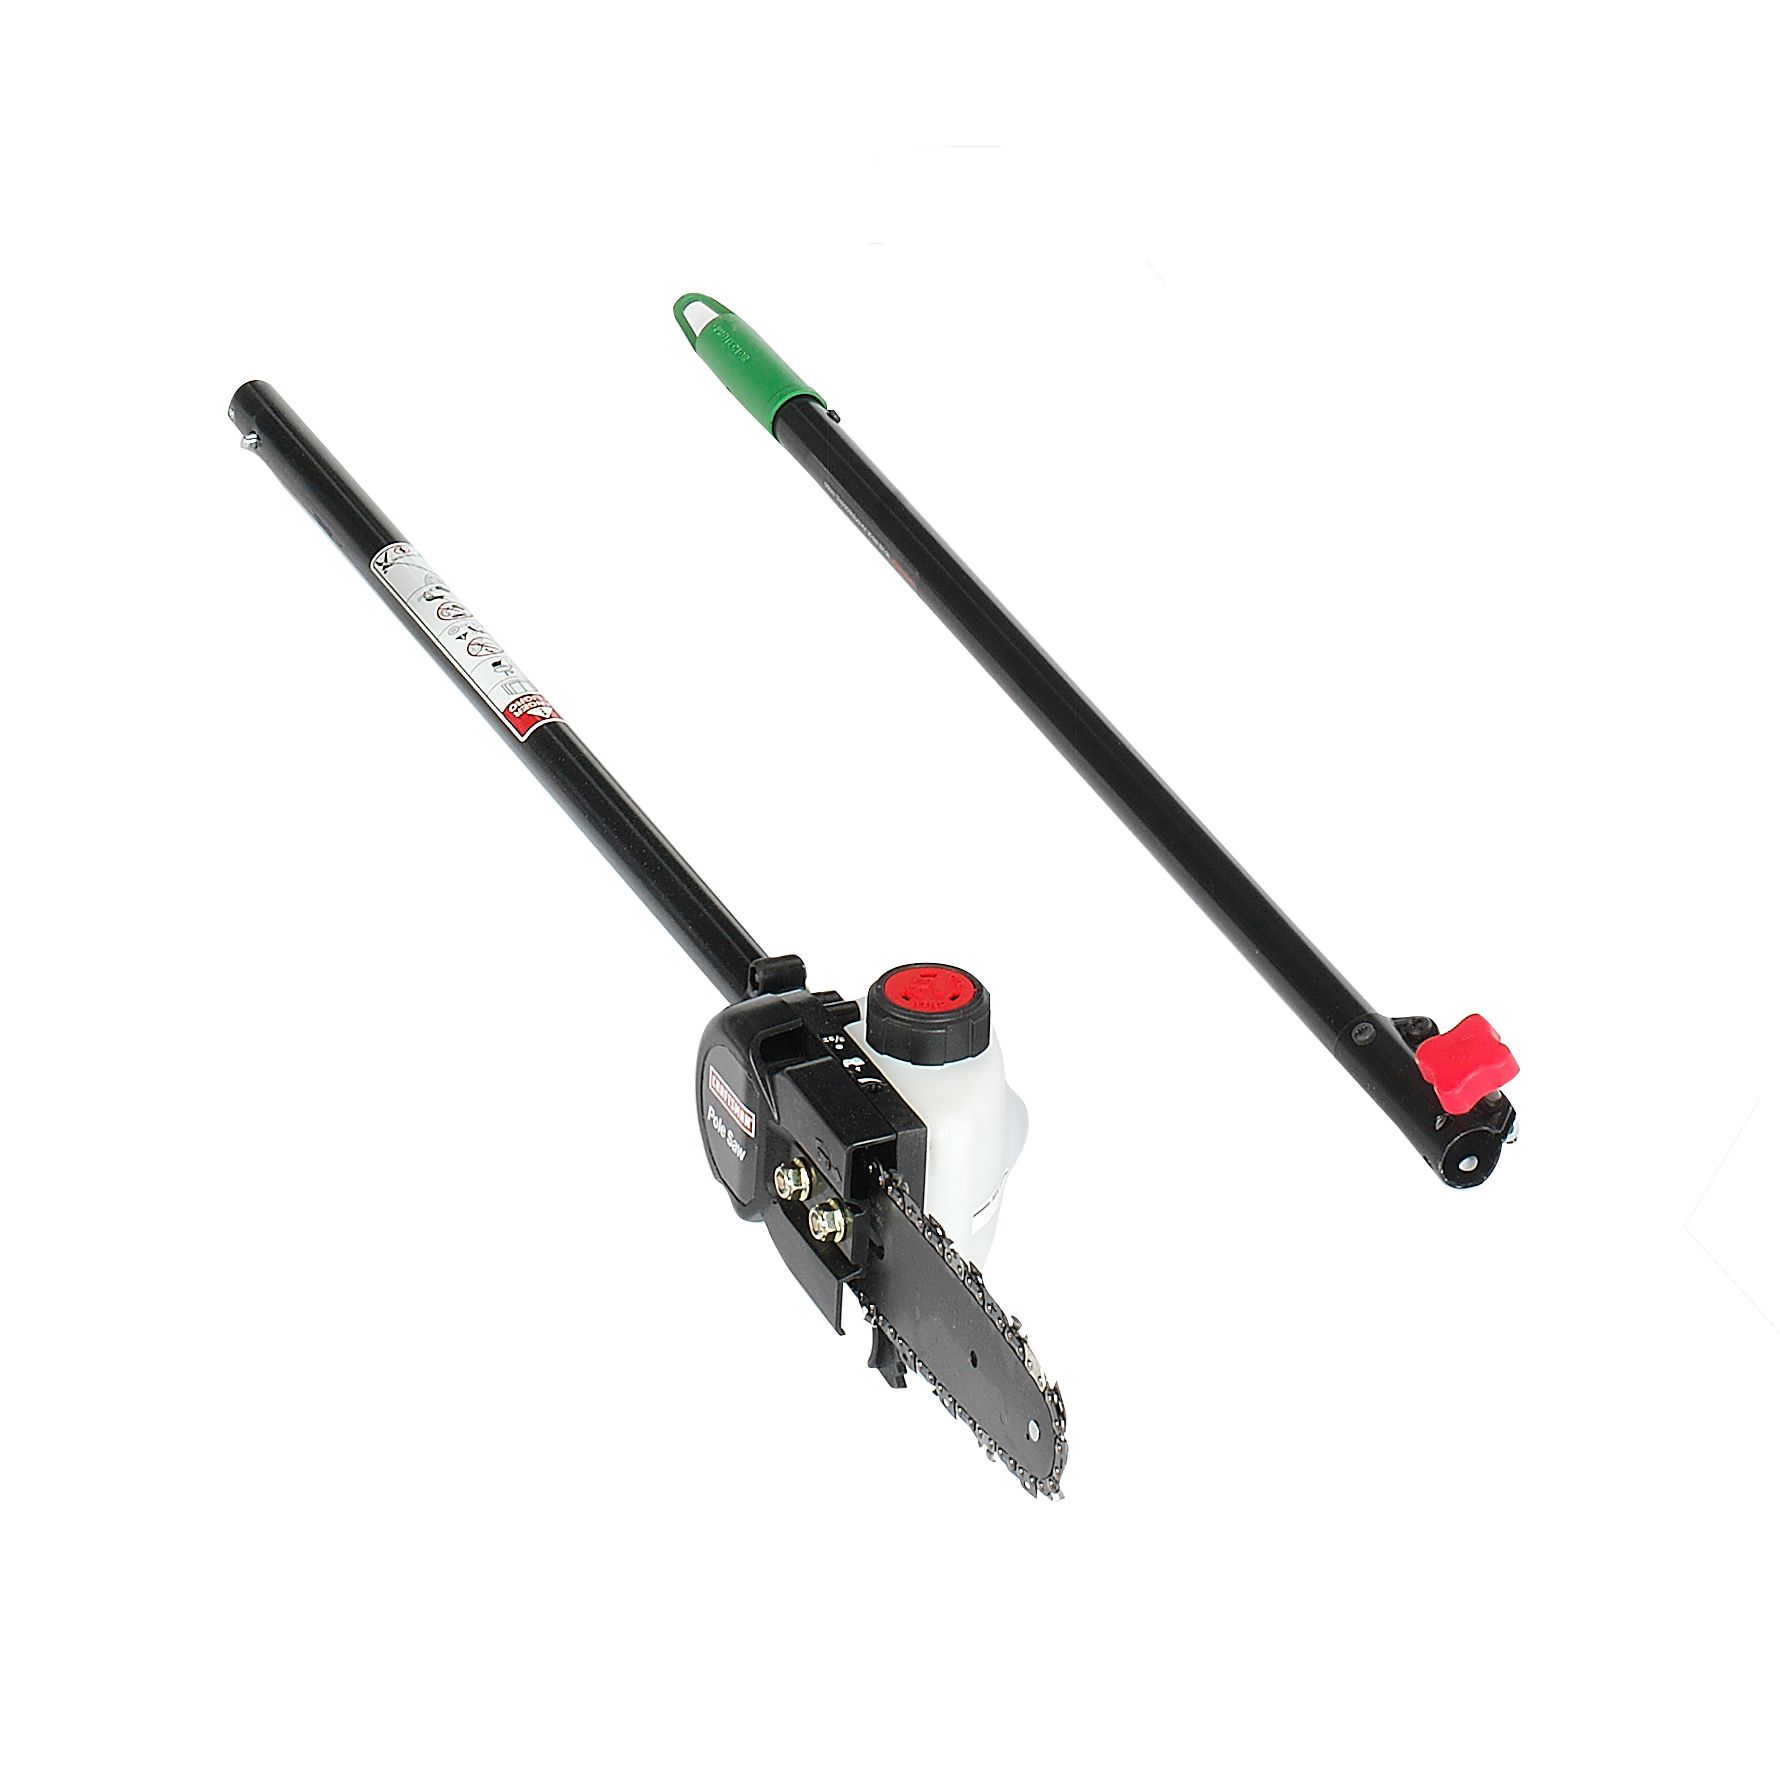 weed eater pole saw